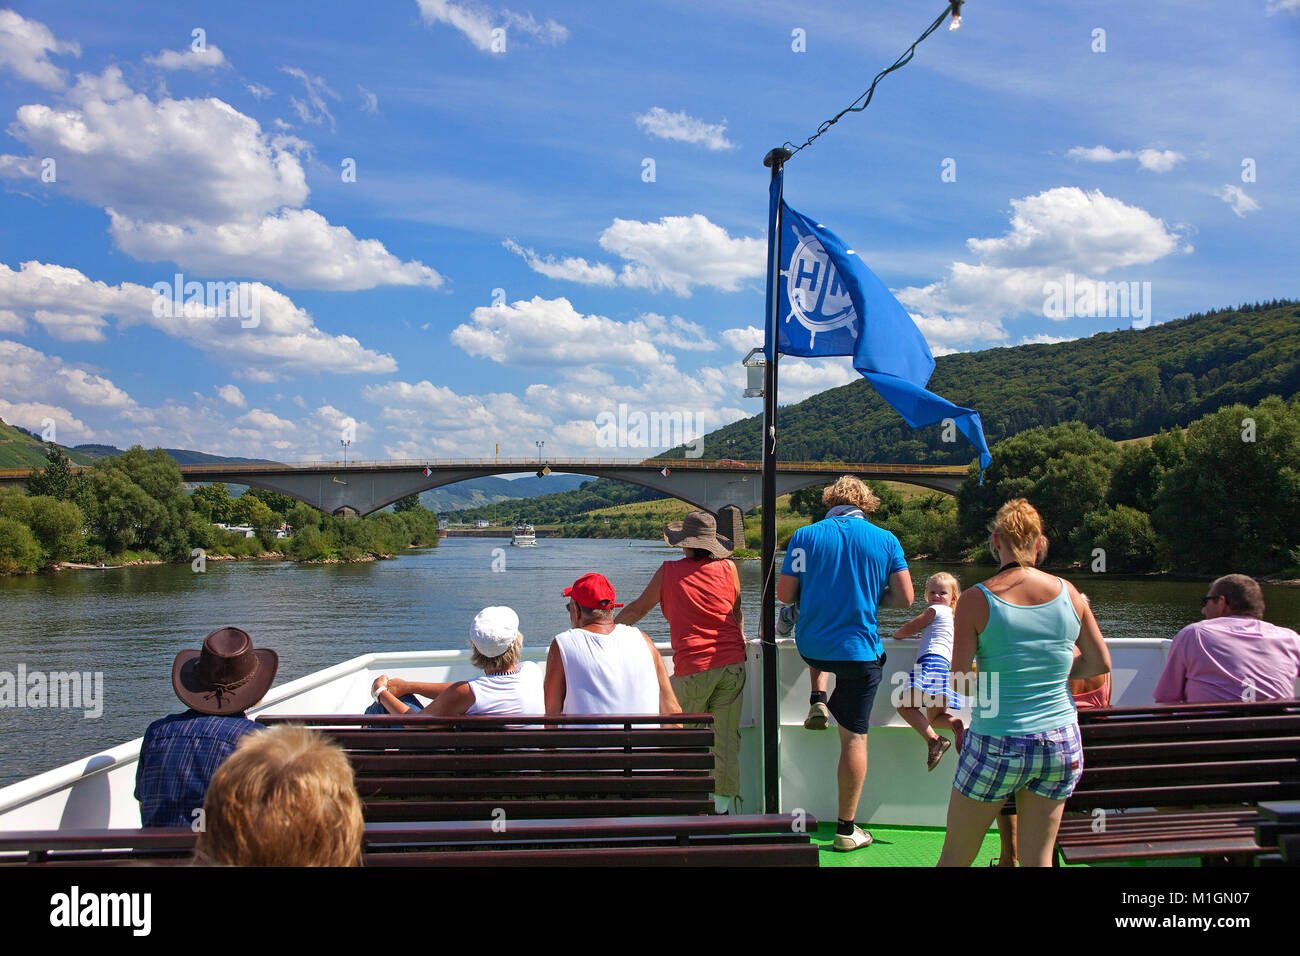 Tourists on excursion boat, boat trip on Moselle river, Zeltingen-Rachtig, Moselle river, Rhineland-Palatinate, Germany, Europe Stock Photo